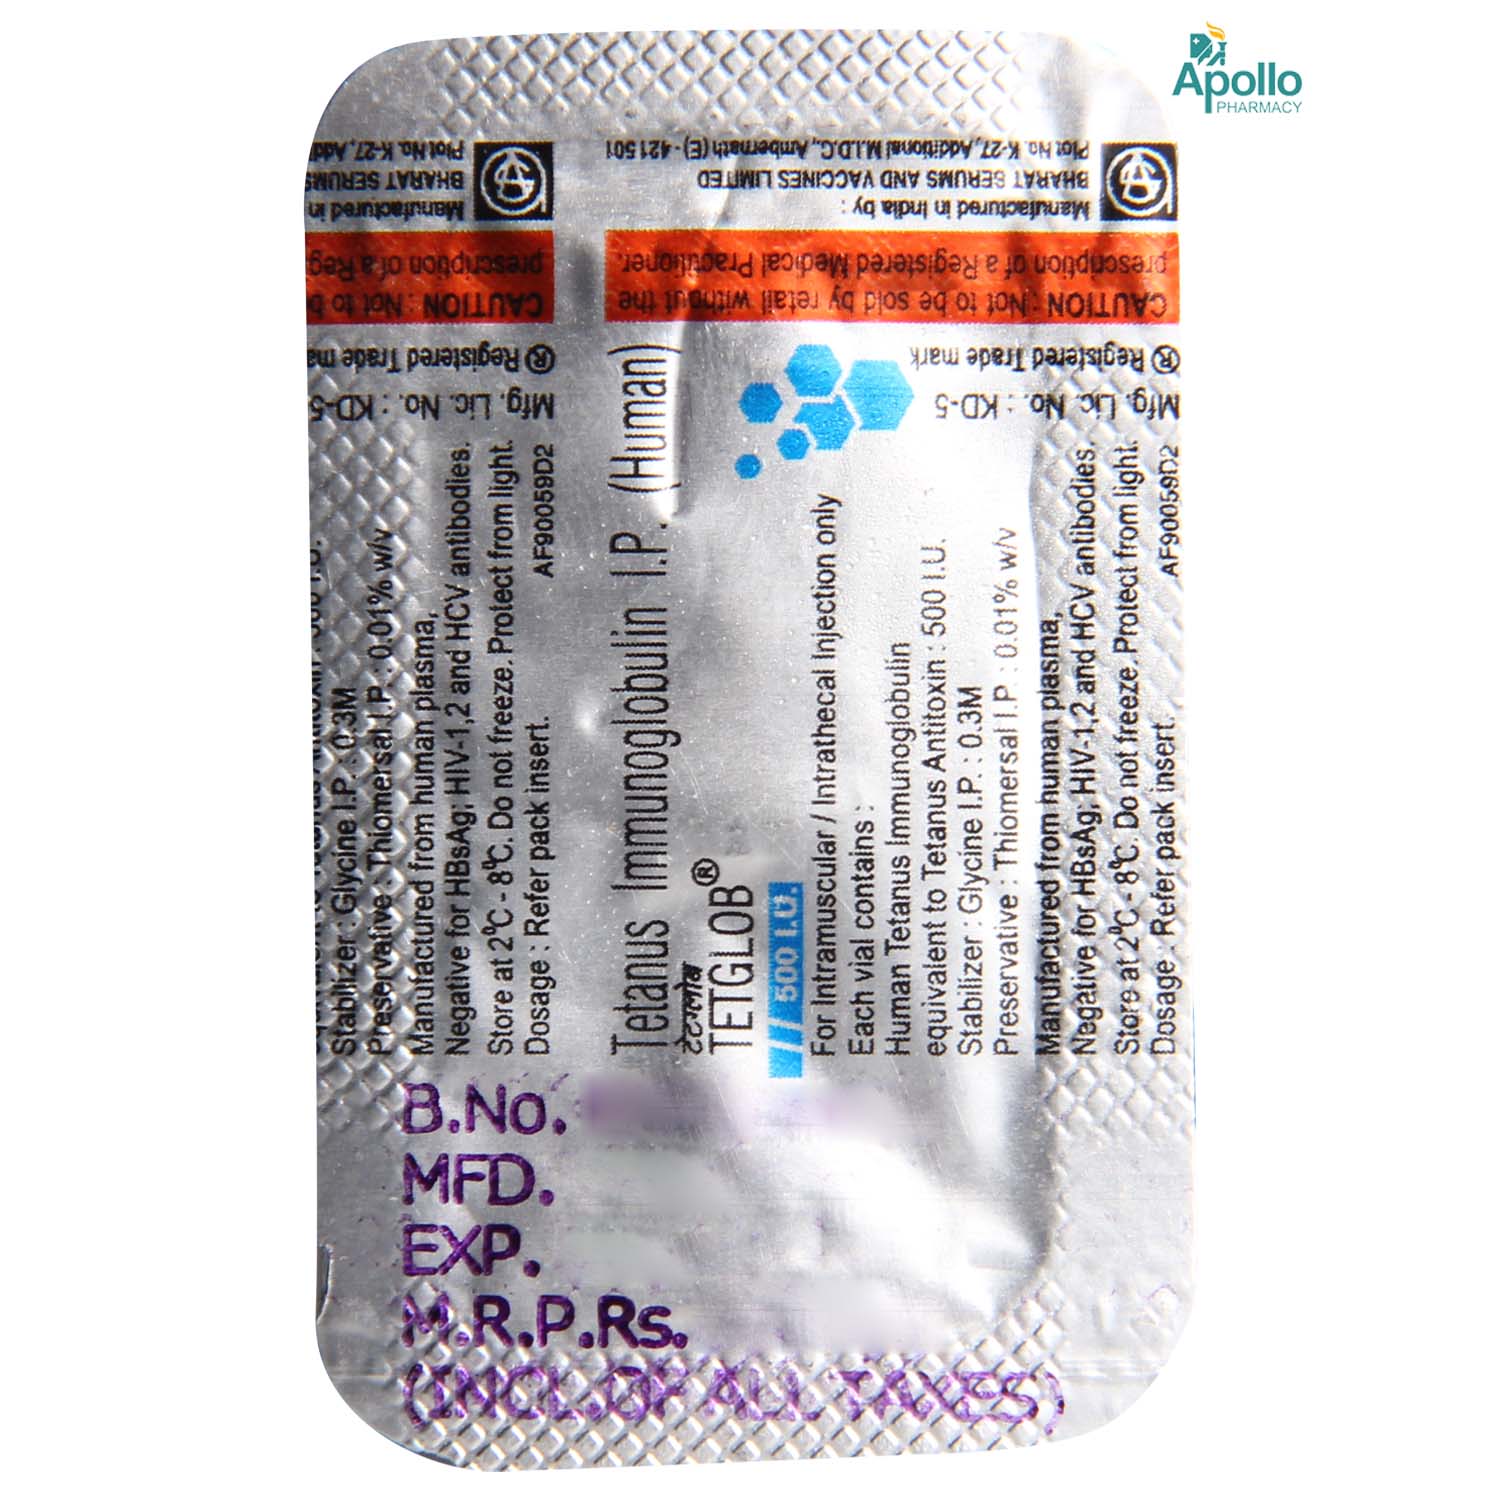 TETGLOB 500IU INJECTION, Pack of 1 INJECTION